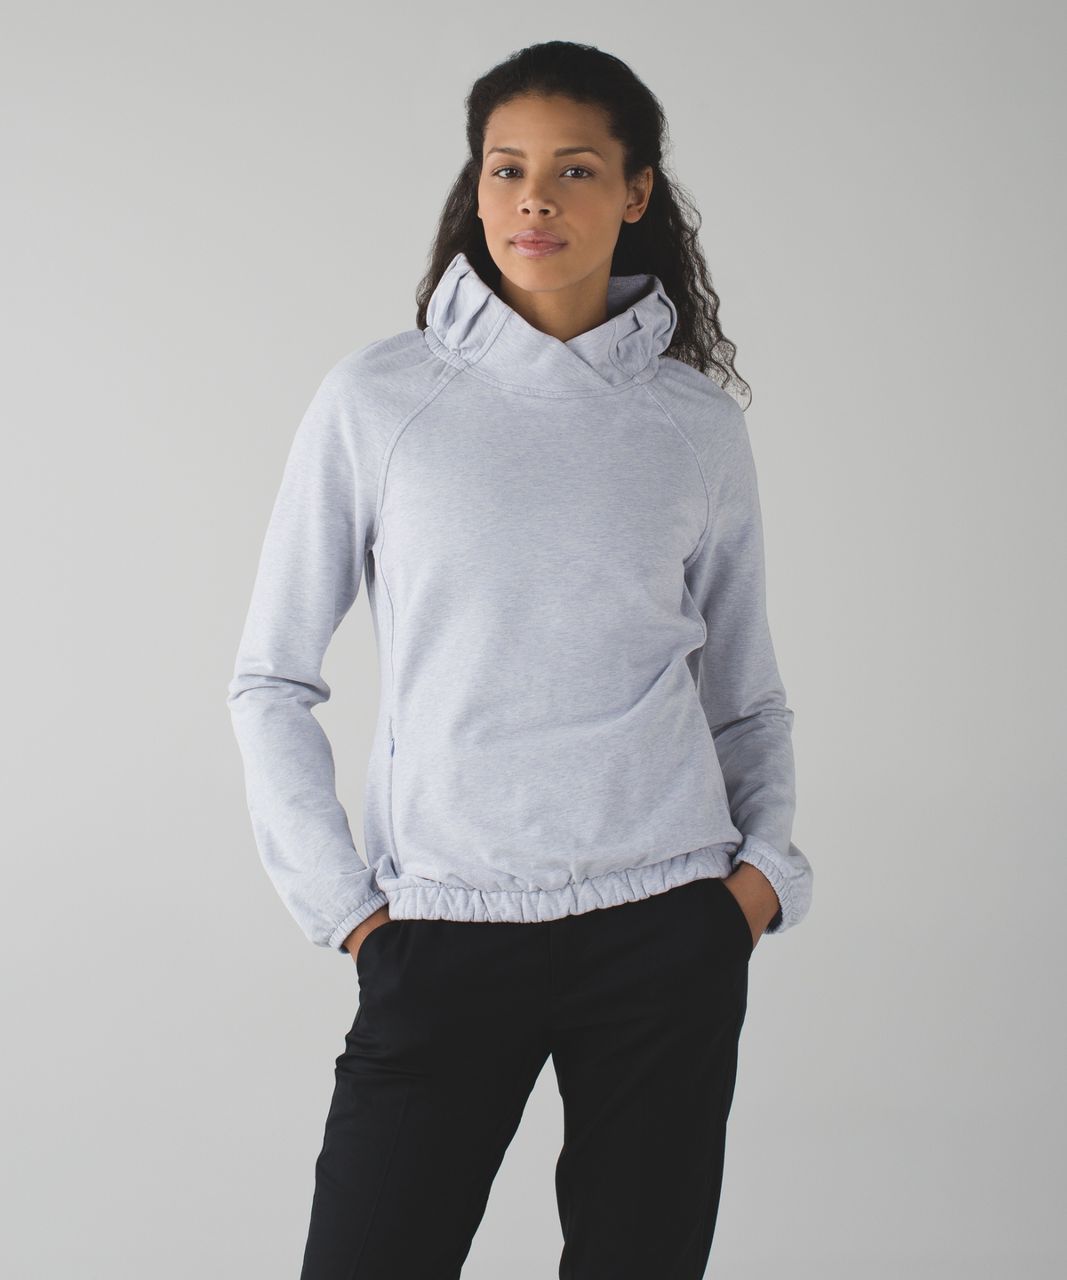 Lululemon After All Pullover - Heathered Cool Breeze